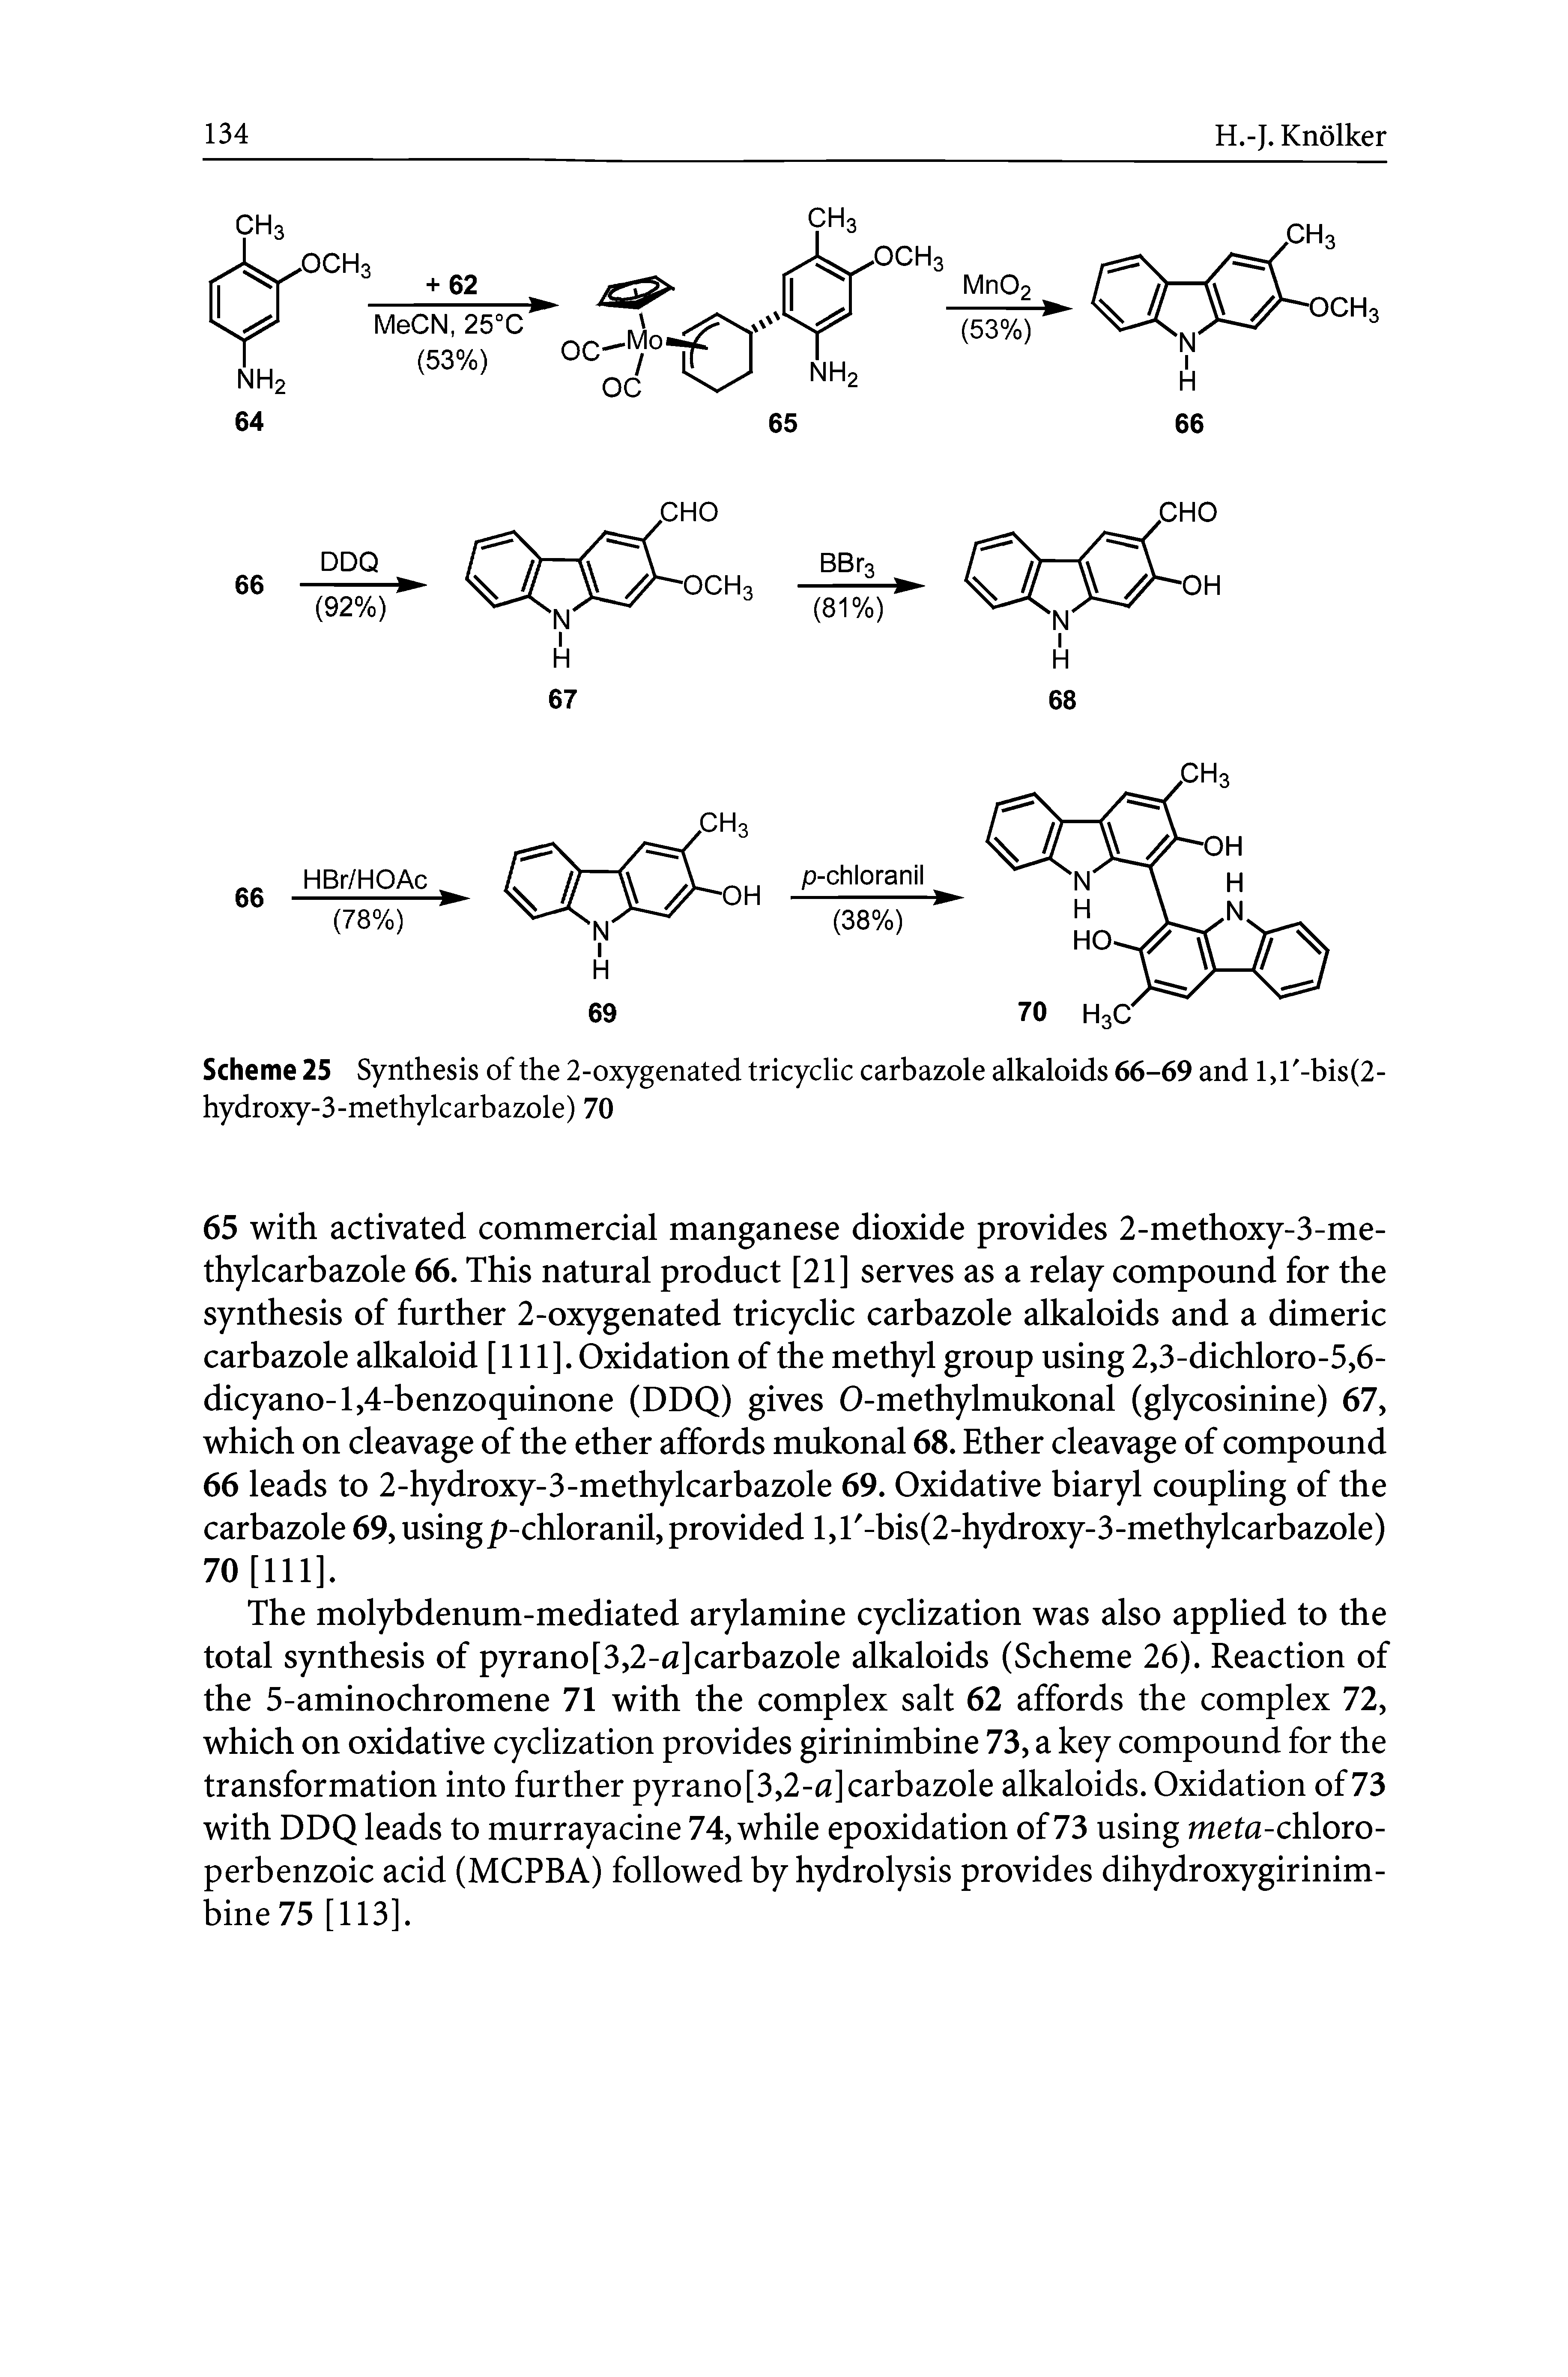 Scheme 25 Synthesis of the 2-oxygenated tricyclic carbazole alkaloids 66-69 and l,r-bis(2-hydroxy-3-methylcarbazole) 70...